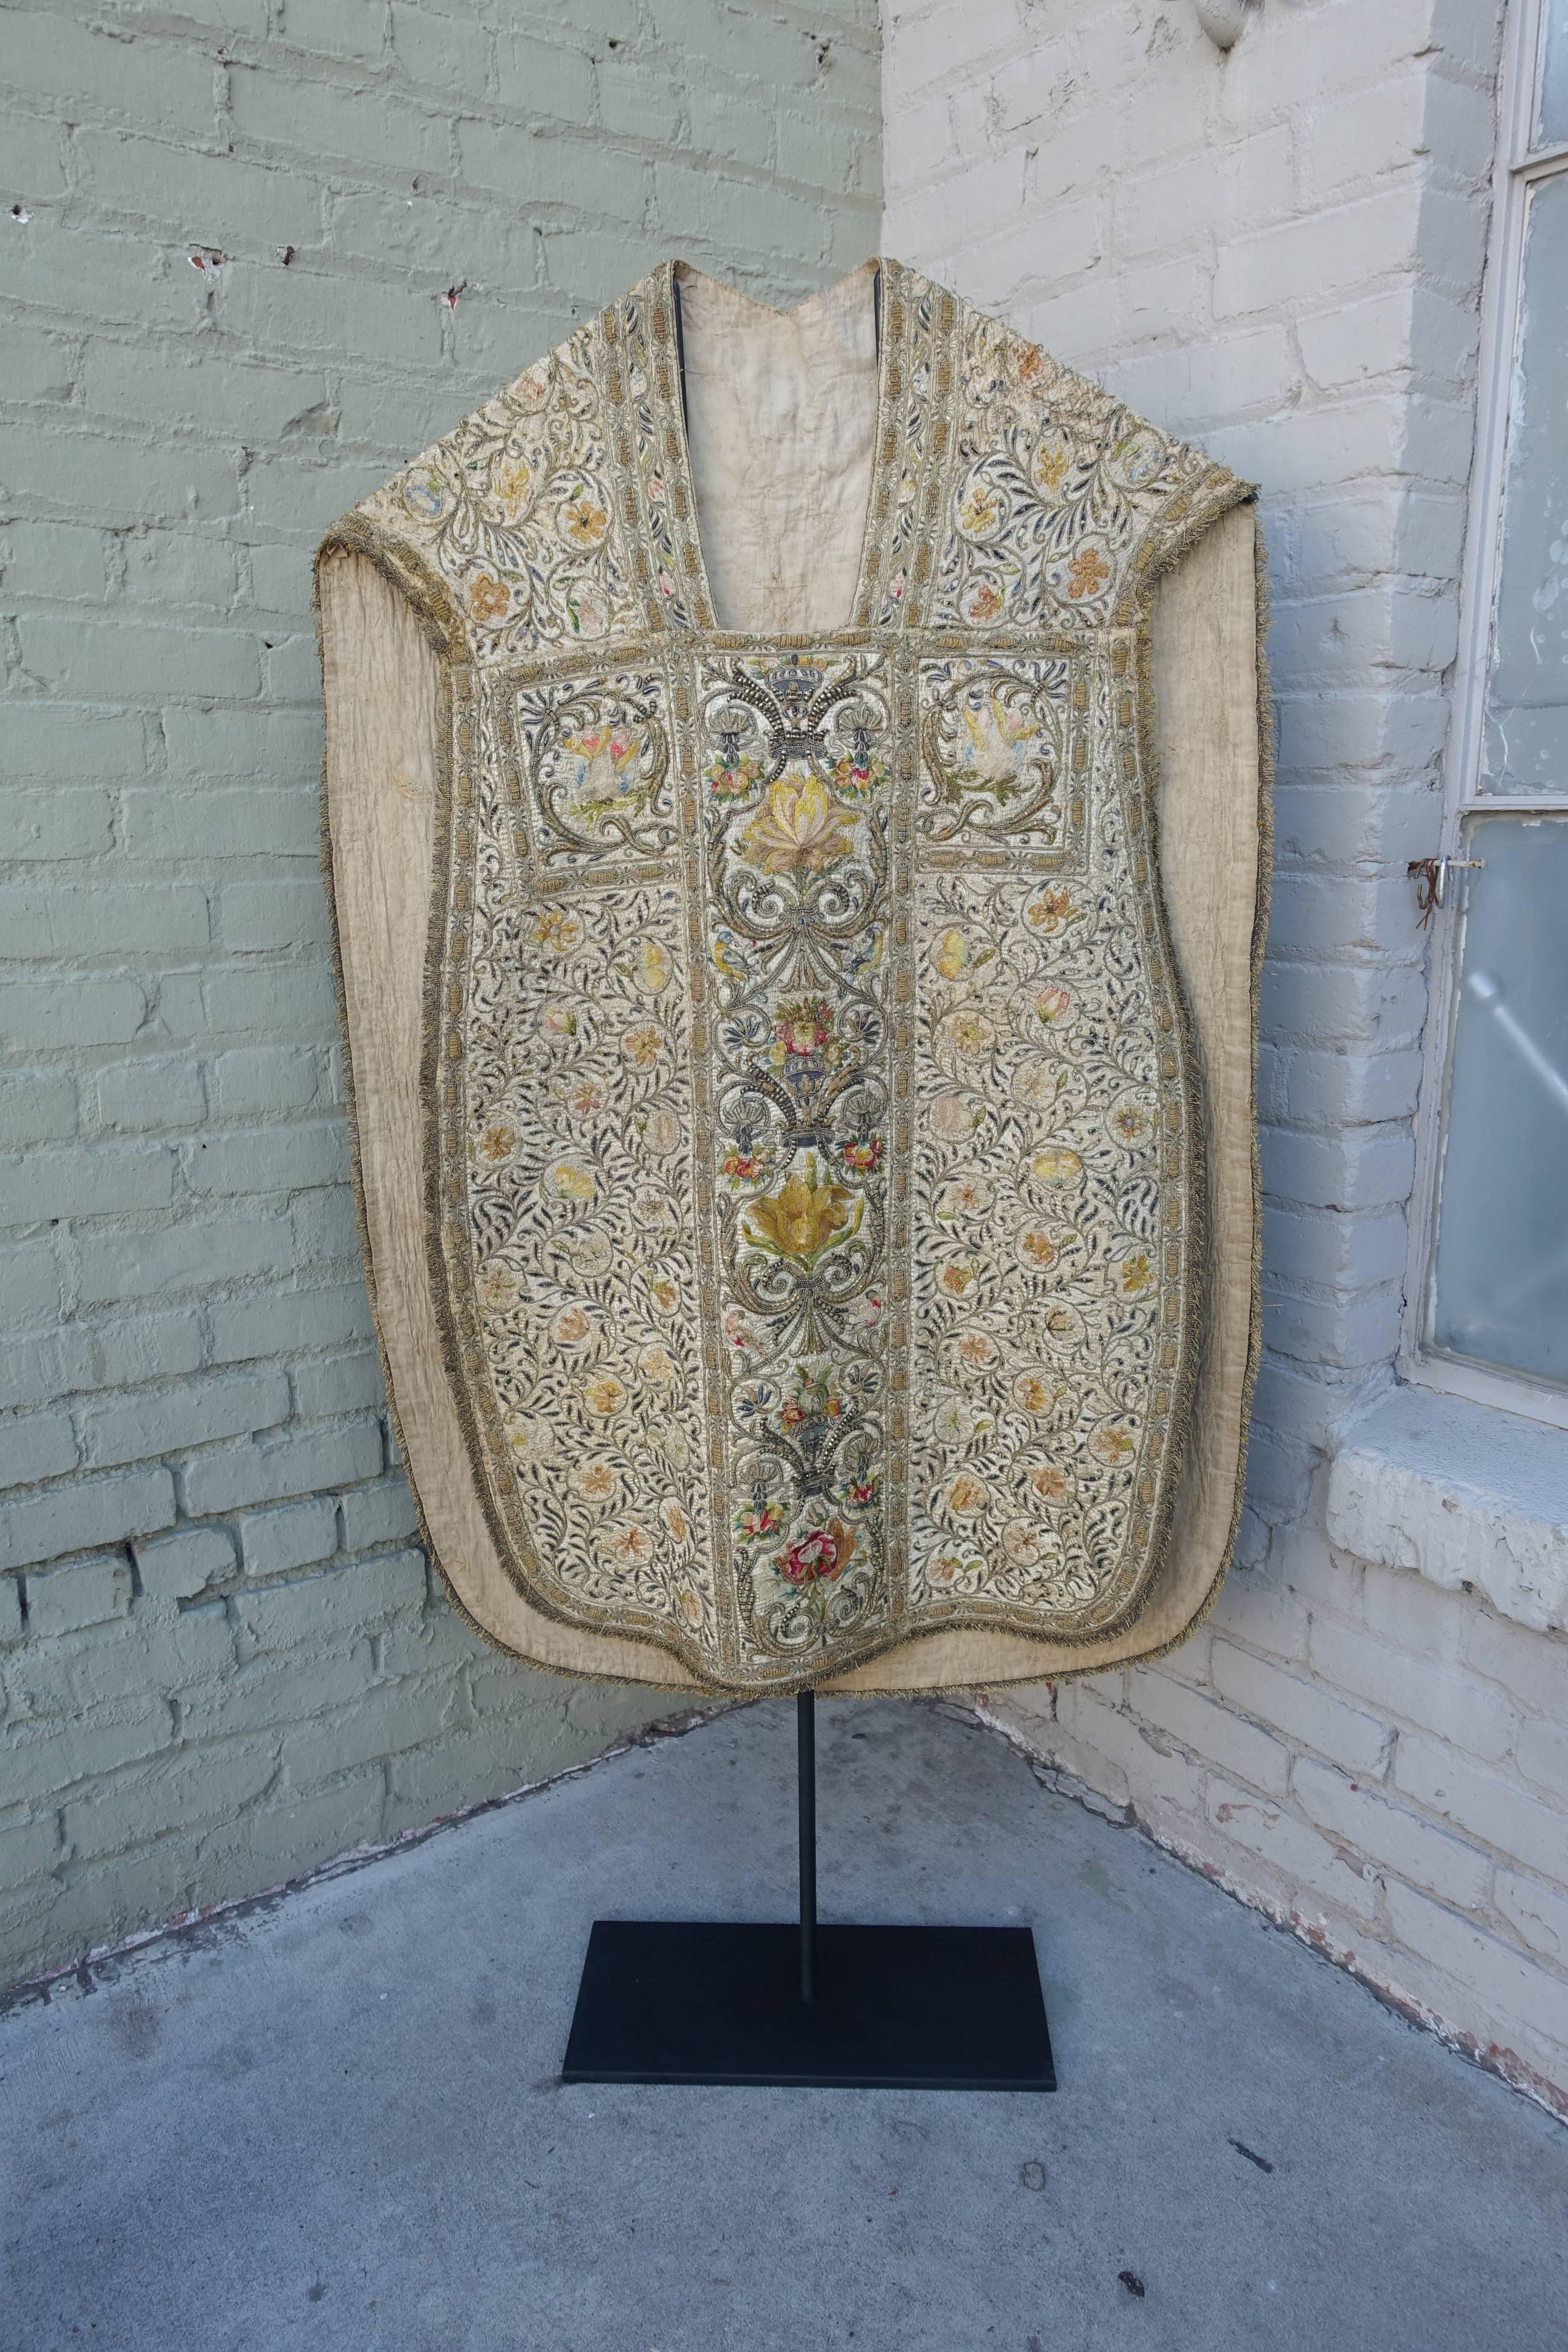 18th century hand metallic and silk embroidered Italian vestment displayed on an iron stand.